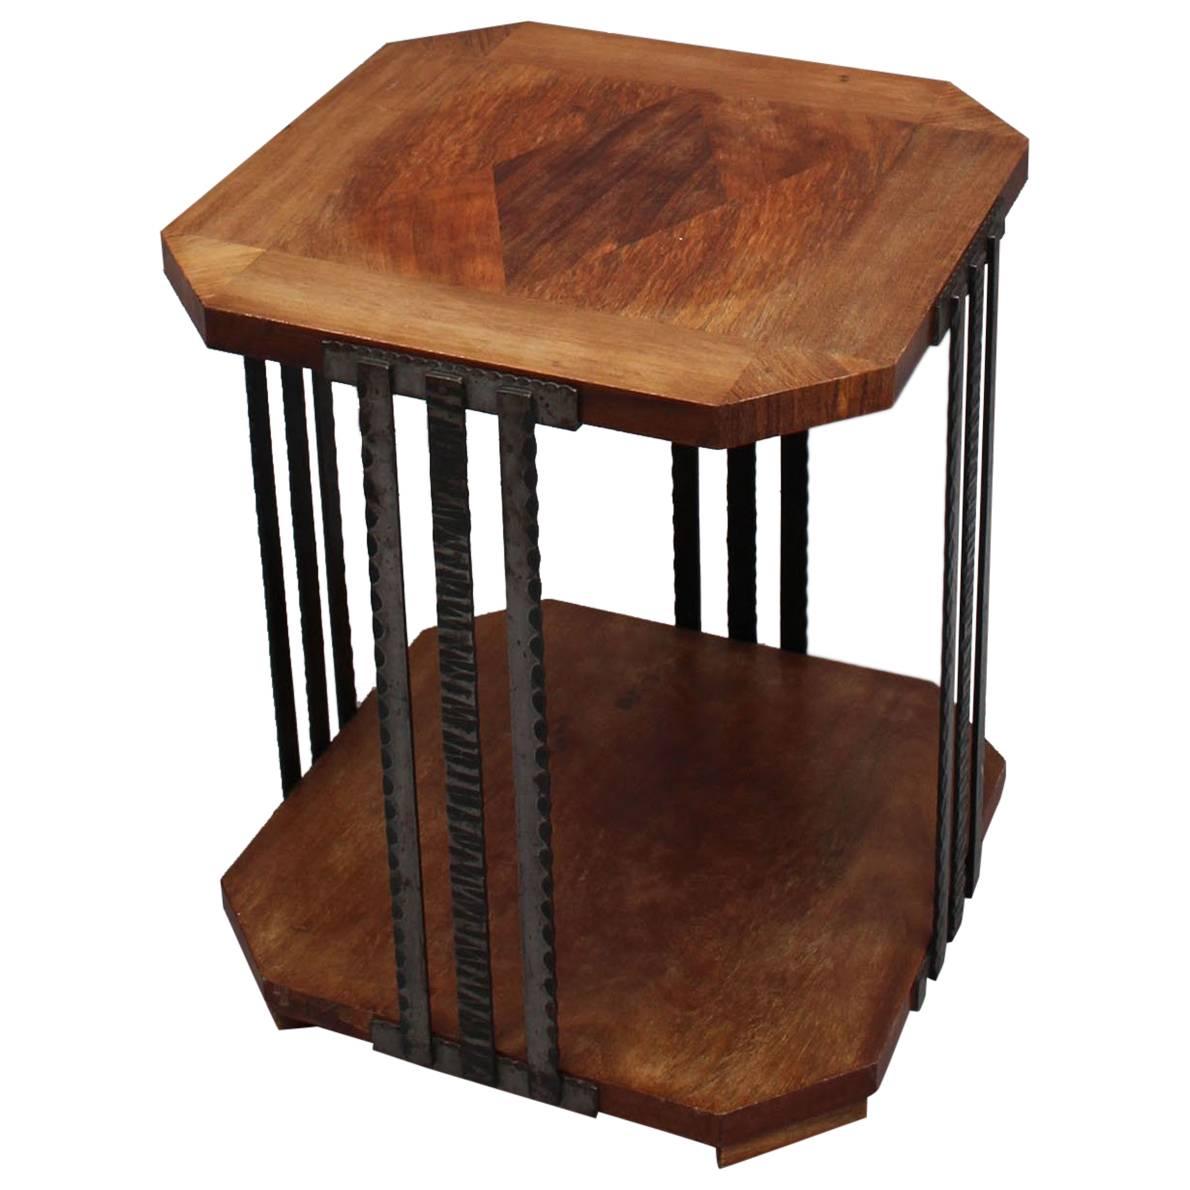 A Fine French Art Deco Wrought Iron and Walnut Gueridon For Sale